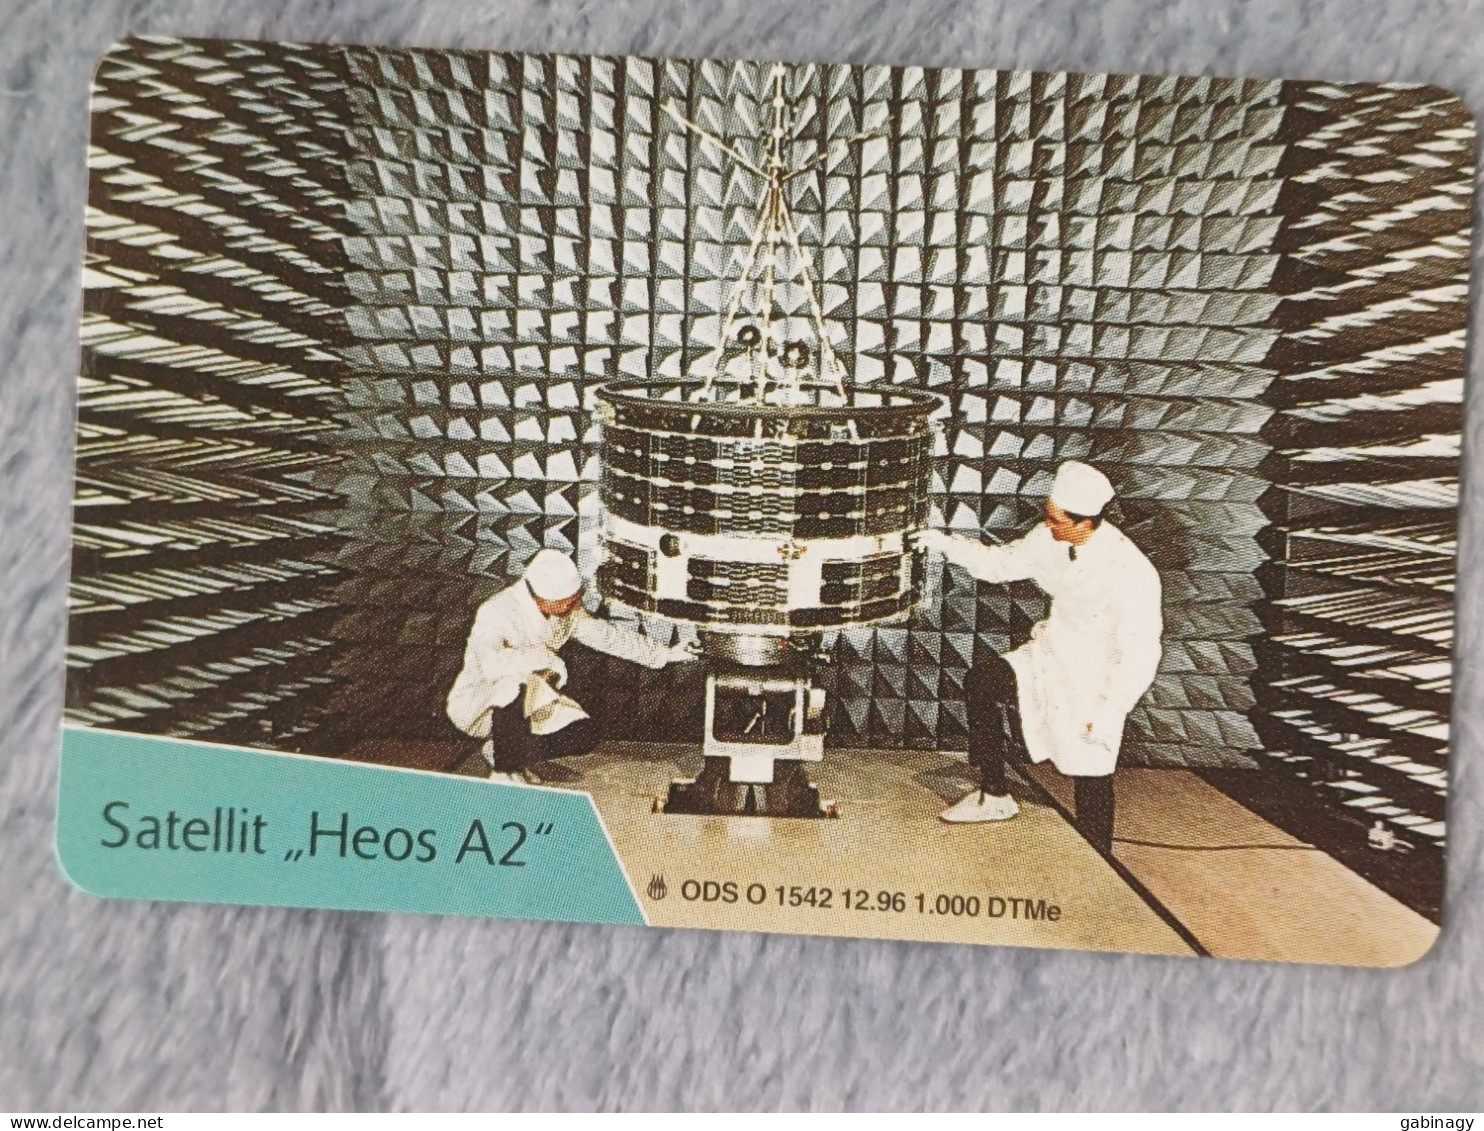 GERMANY-1080 - O 1542 - Eroberung Des Weltraums: Satellit "Heos A2" - SPACE - 1.000ex. - O-Series : Customers Sets